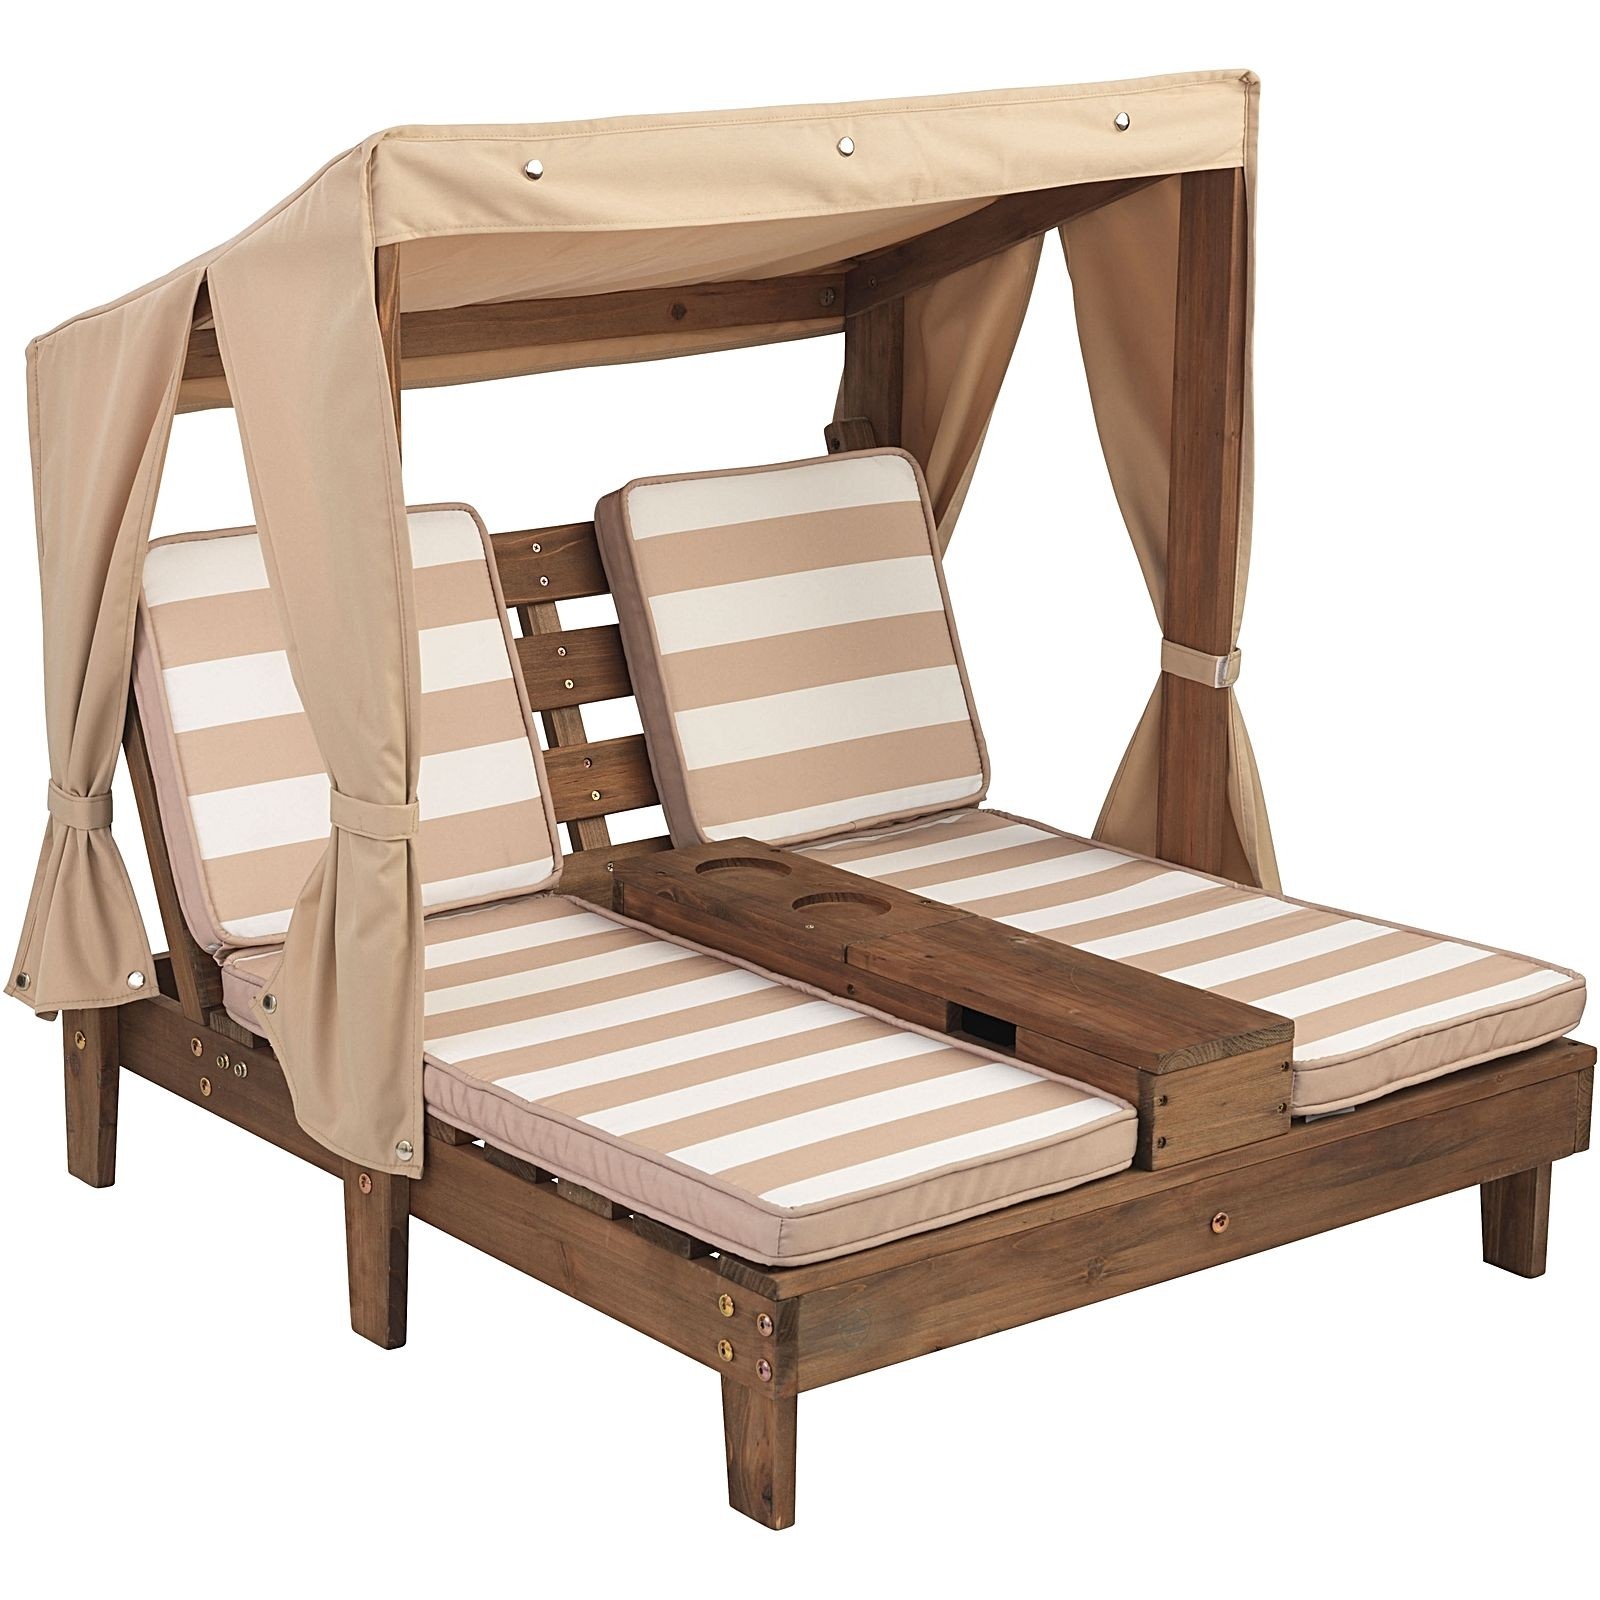 Kids double chaise outdoor lounge beige white by